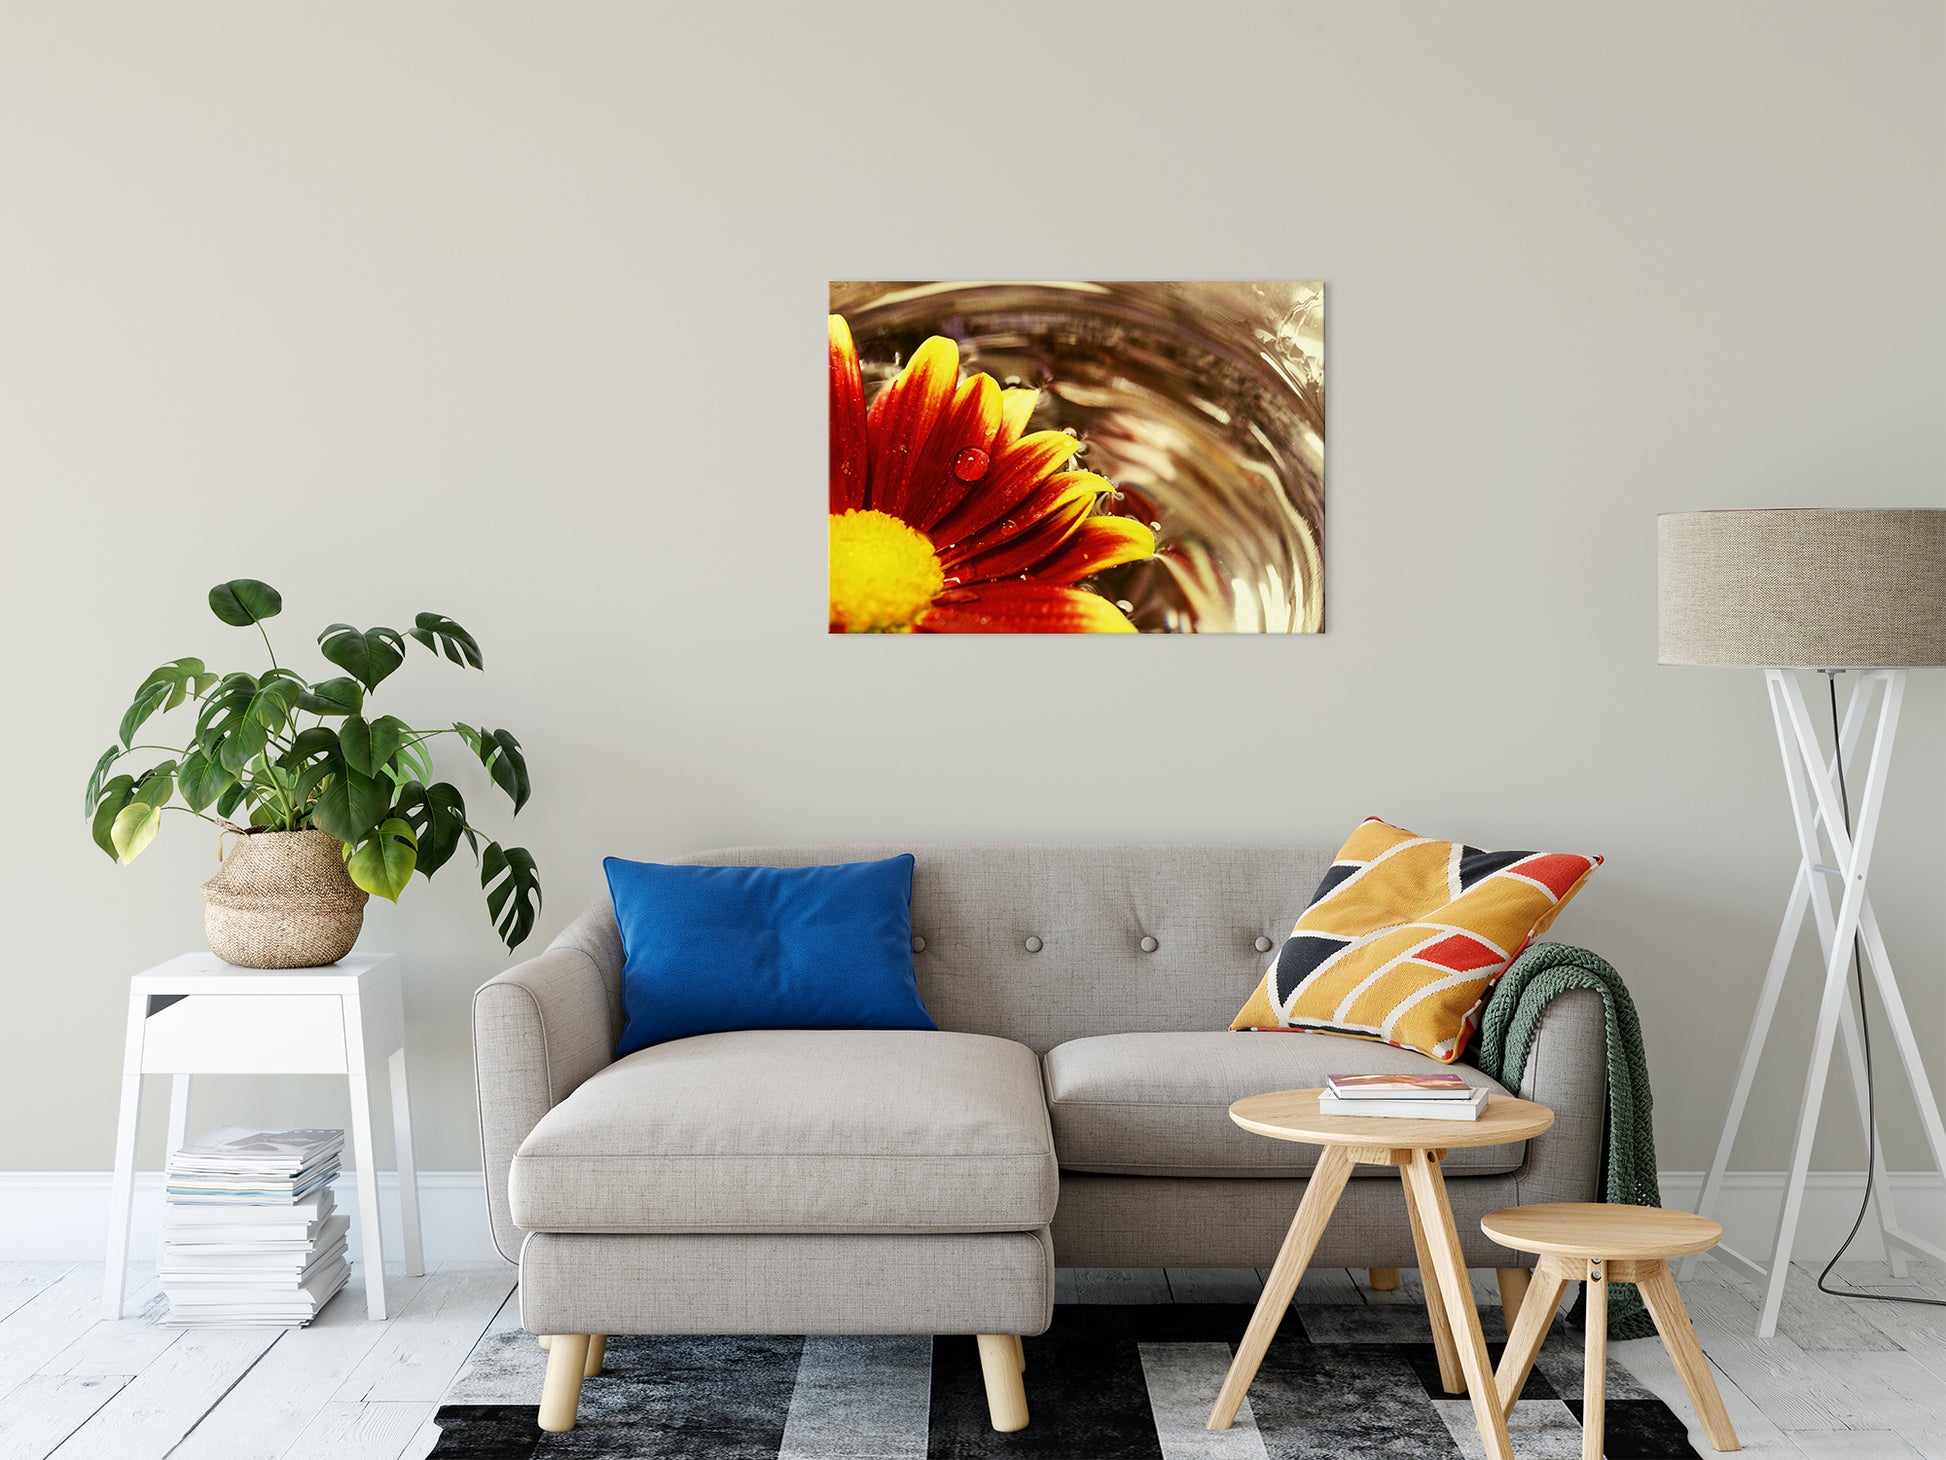 Floating Mum Nature / Floral Photo Fine Art Canvas Wall Art Prints 24" x 36" - PIPAFINEART